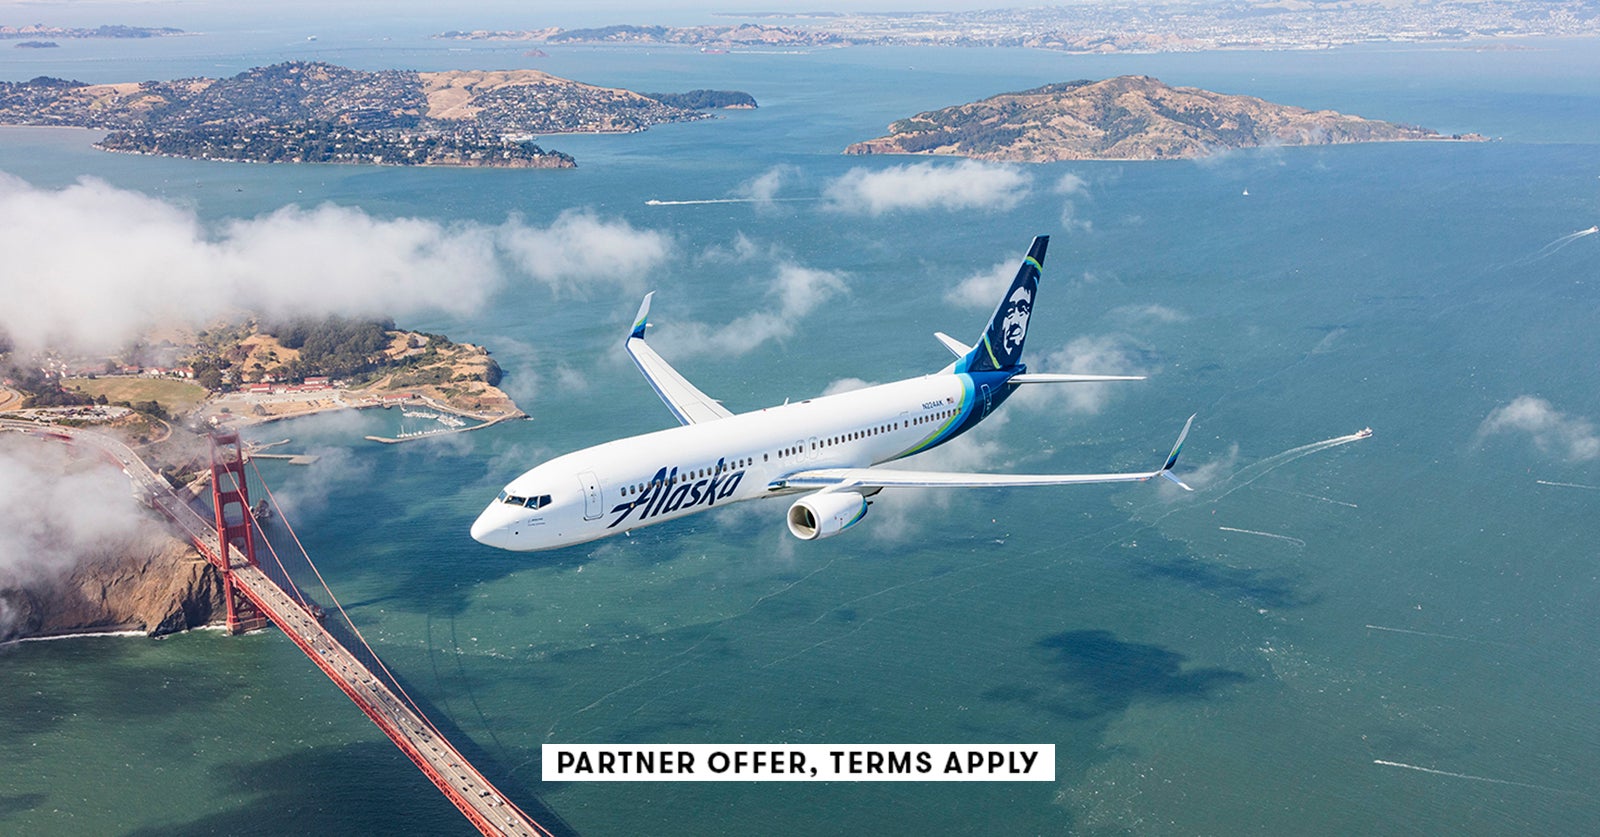 Alaska Airlines Visa Business card review: Good for frequent Alaska business travelers